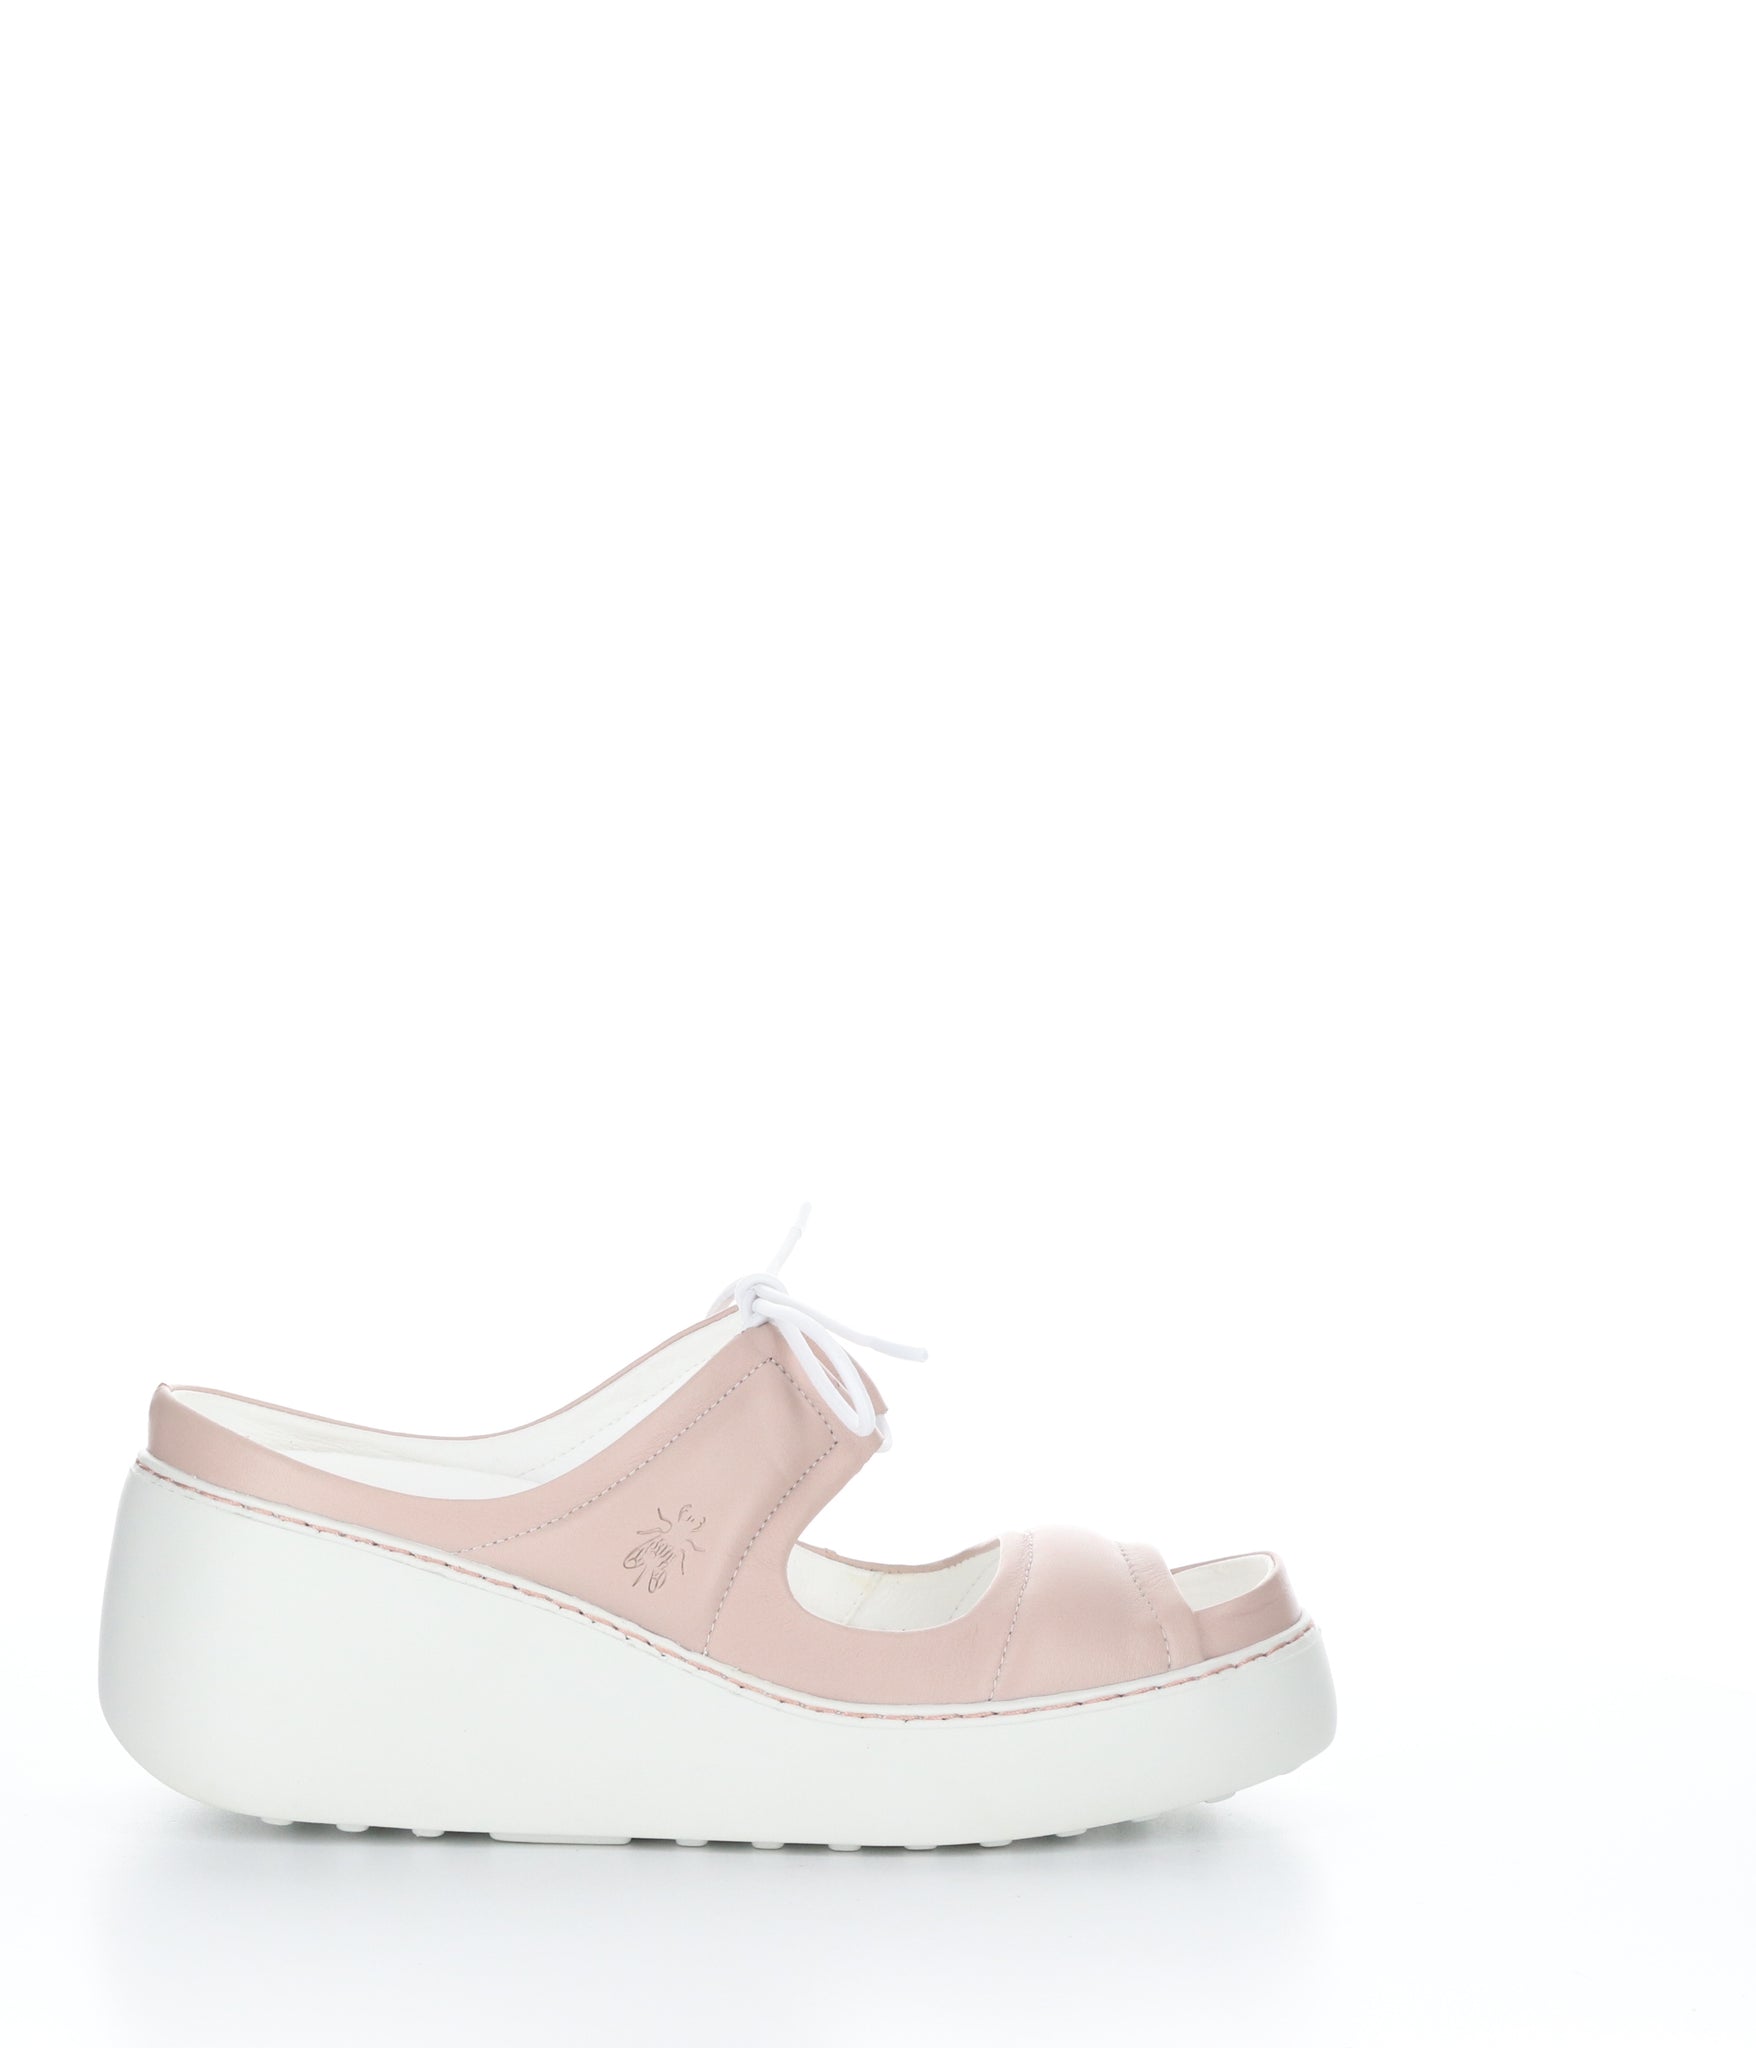 Fly London "Dare" Nude - Lace-up Sandal